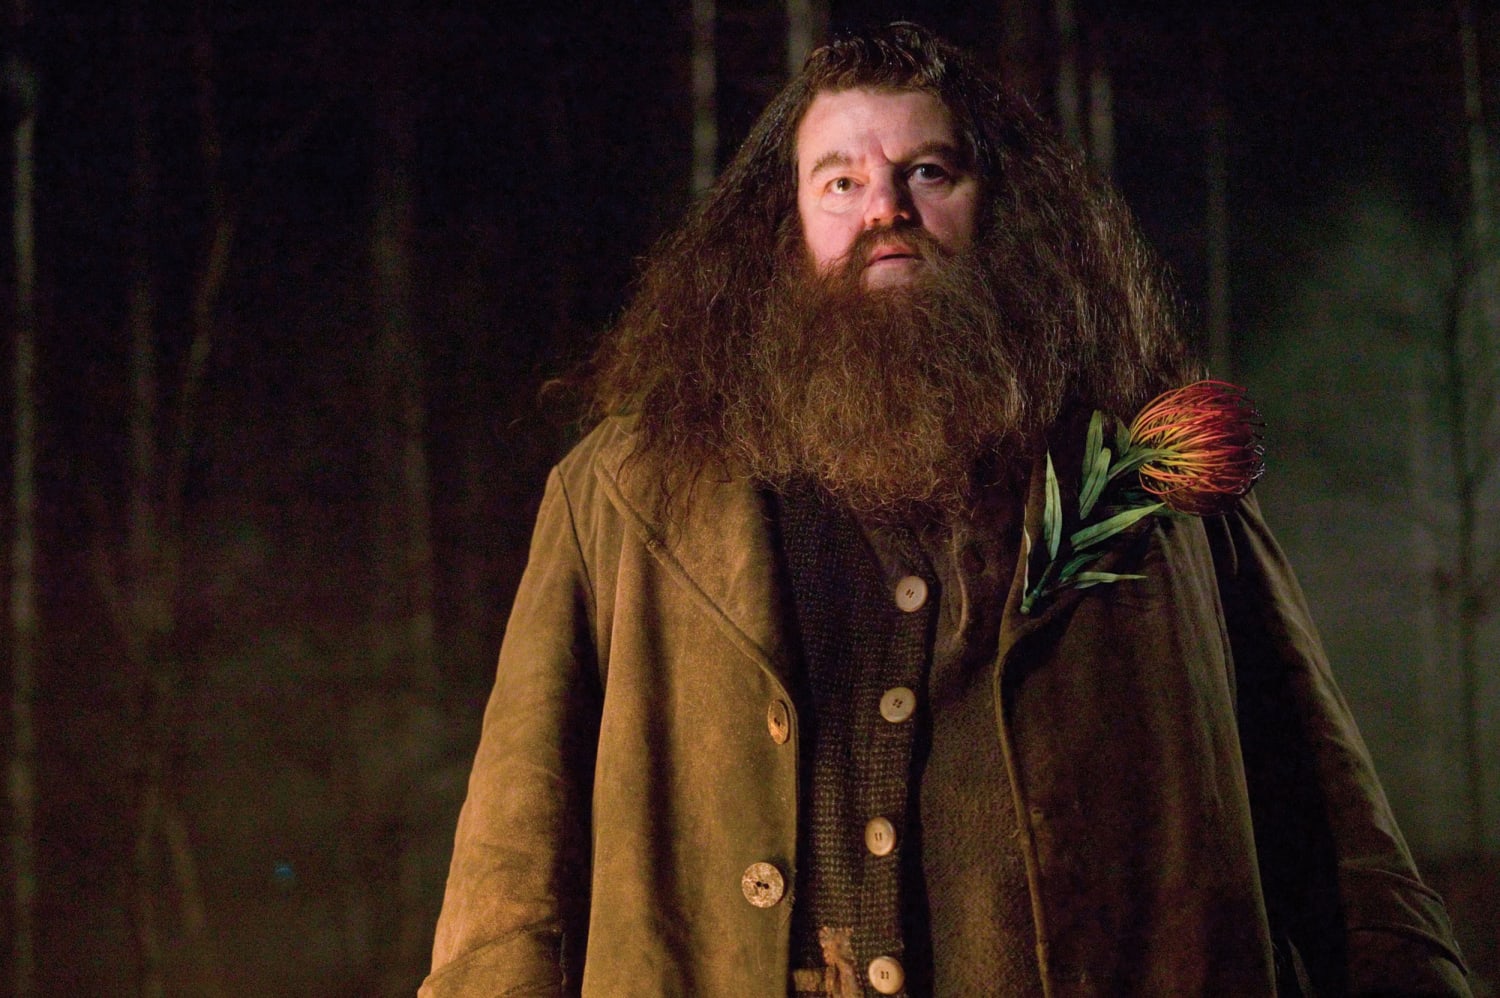 Hagrid in the Harry Potter series